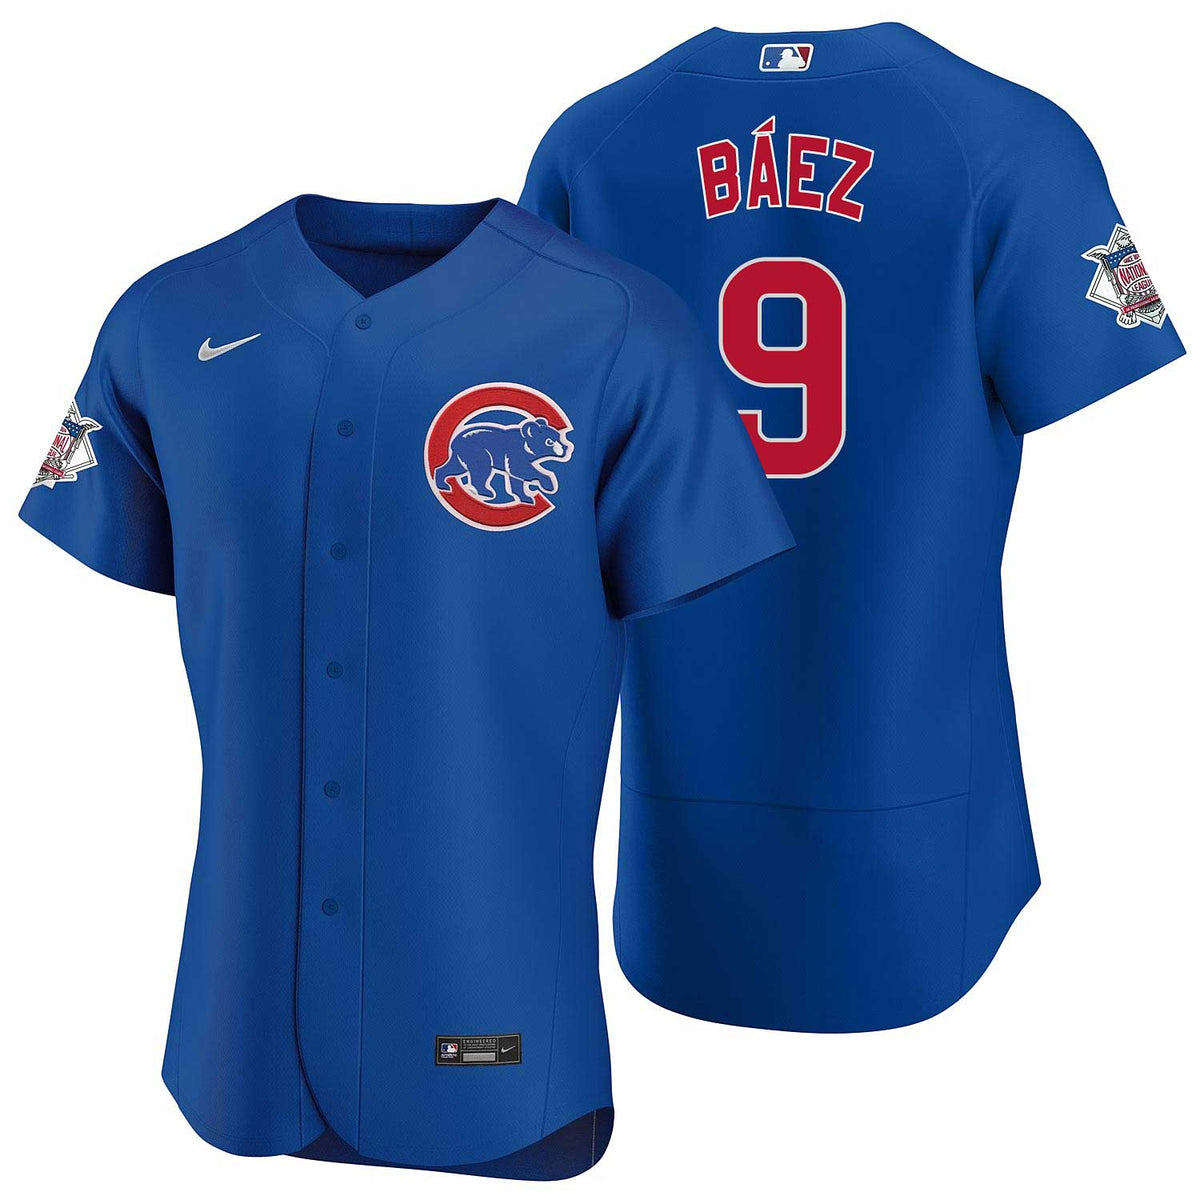 Nike Chicago Cubs Jersey Mens Size XL White Baez MLB India